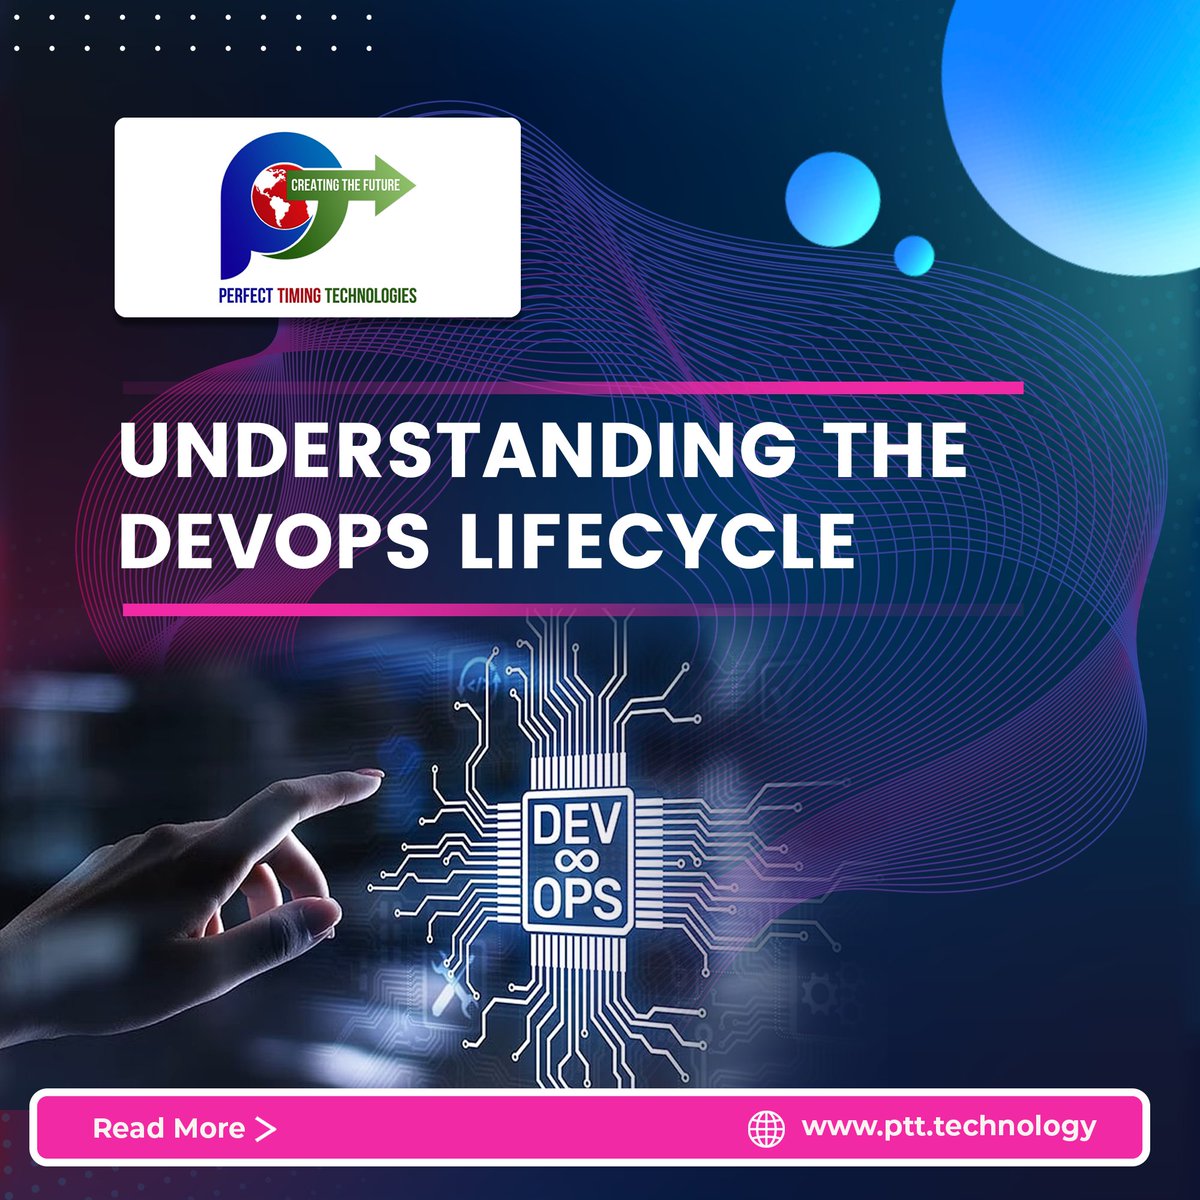 Unlock the secrets of the DevOps lifecycle and optimize your development process! Dive into the details here: ptt.technology/2023/10/unders…

#DevOpsLifecycle #SoftwareDevelopment #ContinuousIntegration #AgileMethodology #TechInsights #PerfectTimingHolding #PerfectTimingTechnologies